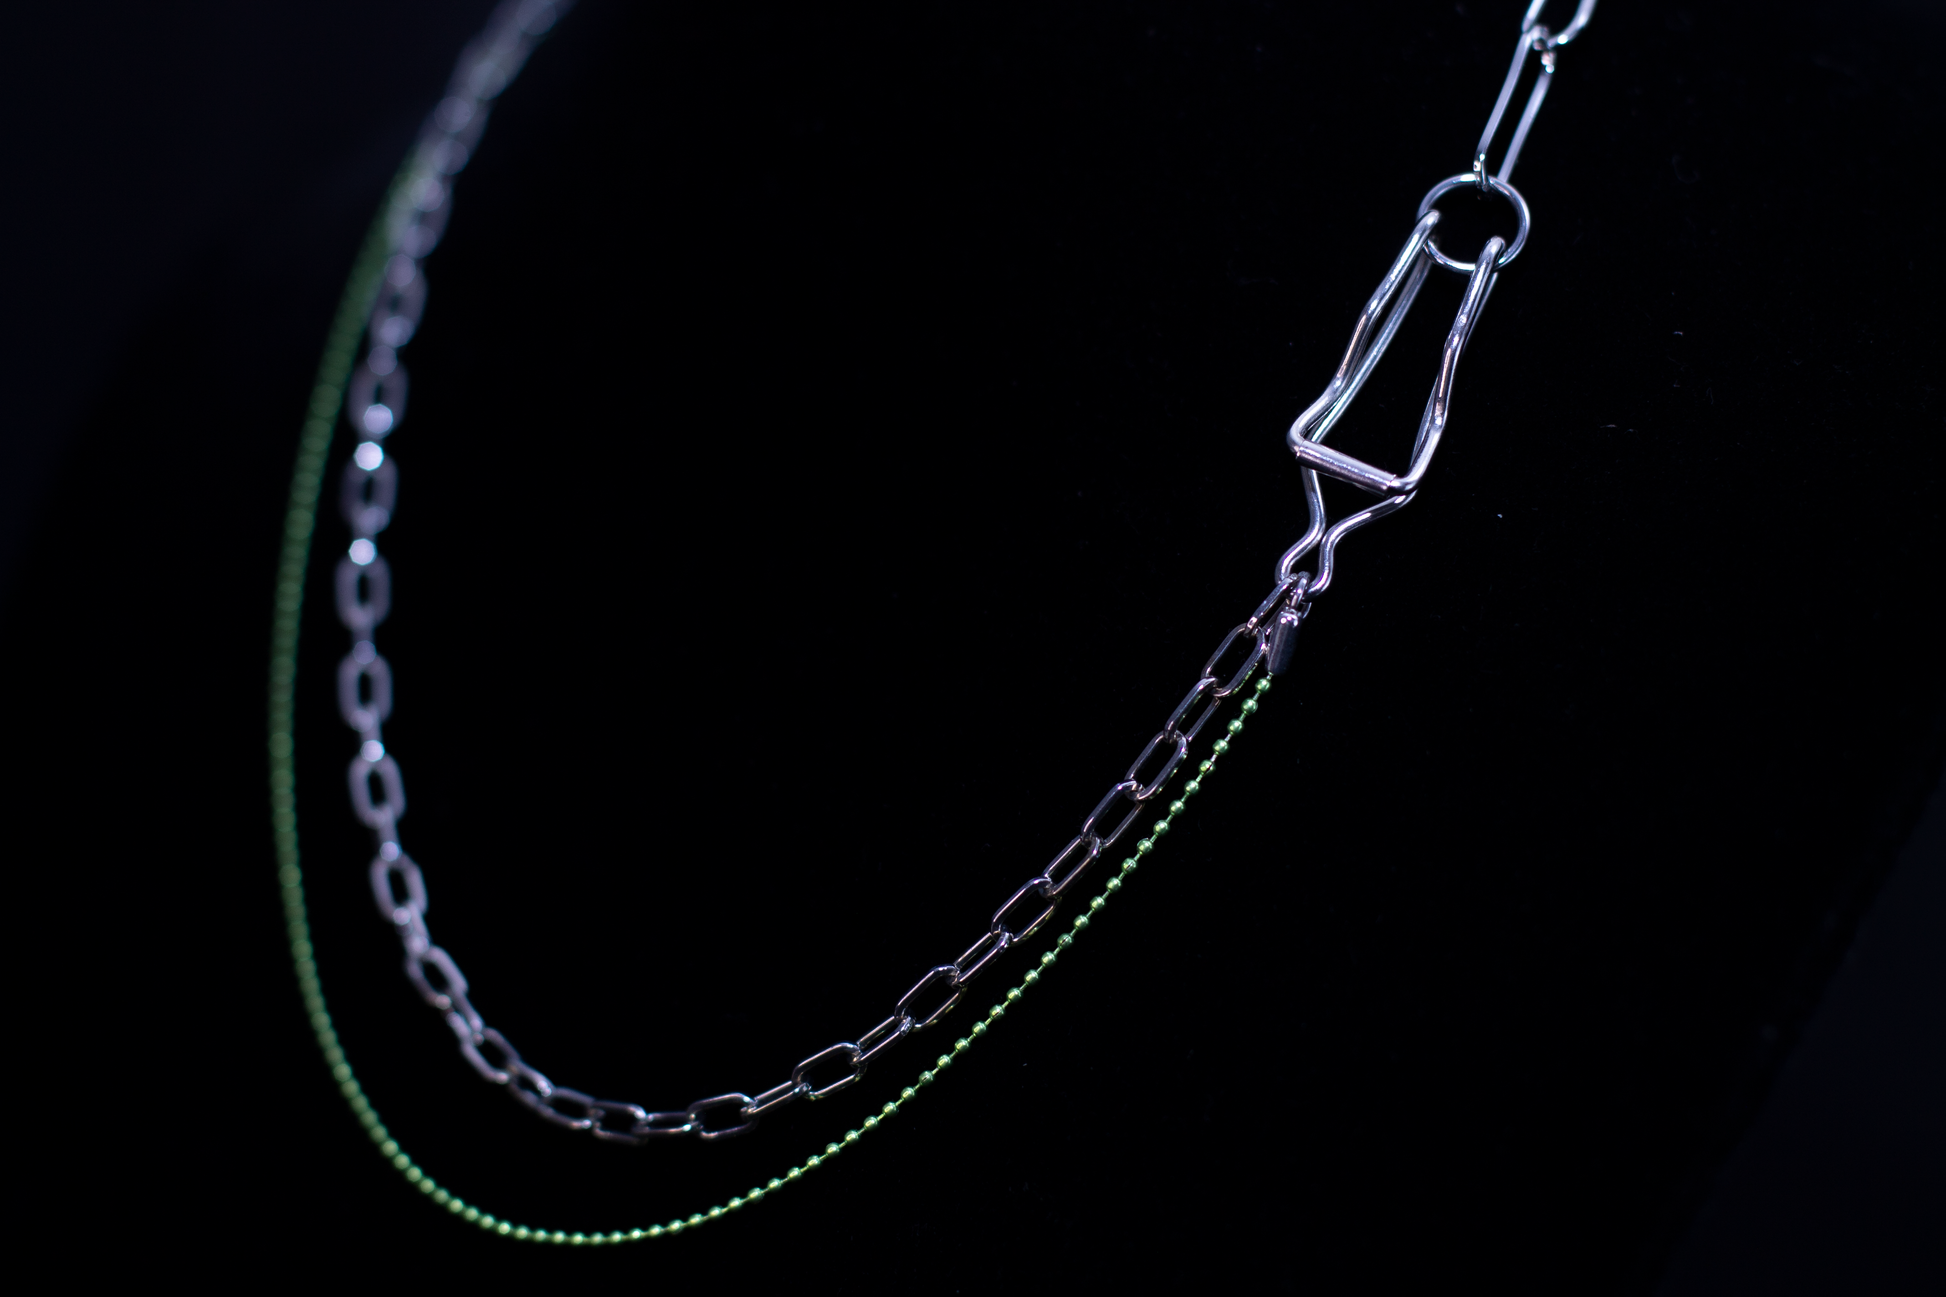 This image showcases a Myril Jewels punk silver and green chain necklace, displayed on a dark backdrop. The necklace features a contrast of sleek silver links with vibrant green accents, encapsulating the neo-goth aesthetic. It's a striking piece for those drawn to dark-avantgarde fashion, perfect for Halloween, and versatile for everyday wear, from minimal goth to the more elaborate witchcore and whimsigoth styles, as well as being suitable for rave parties and festival adornment.